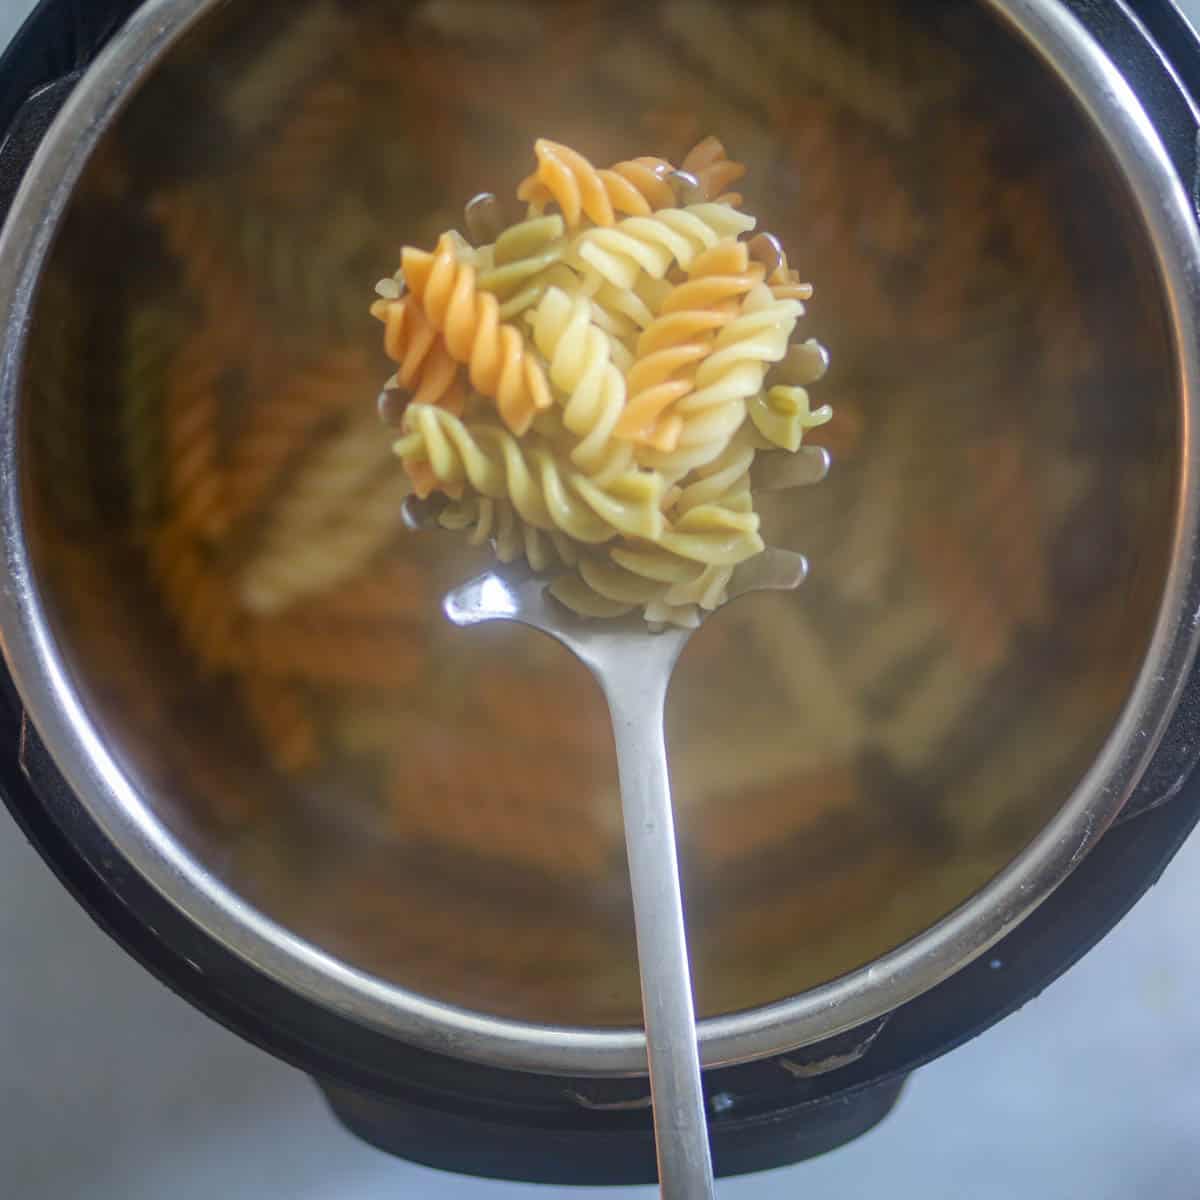 Once pasta is boiled, strain .